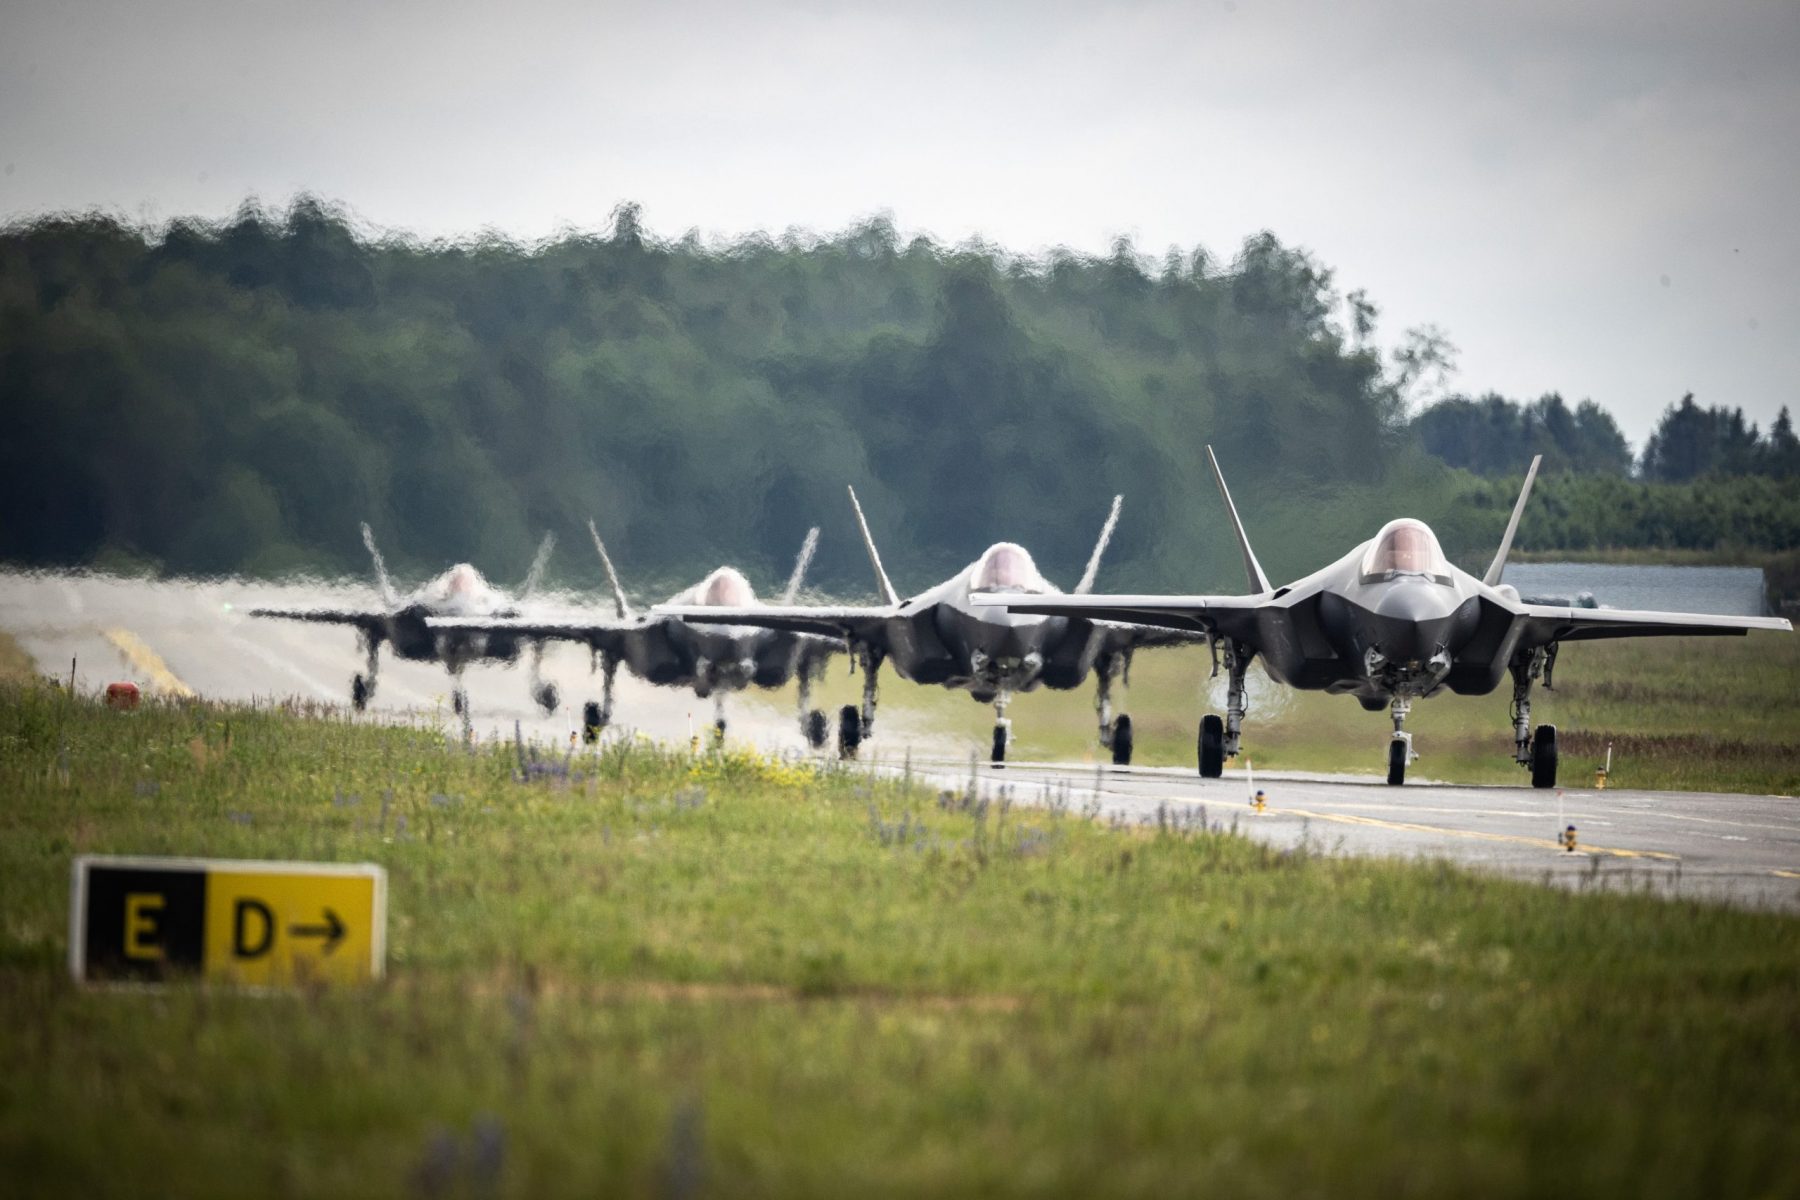 US Air Force F-35 combat jets reinforcde NATO troops in Estonia on 8 July 2022 (Photo by the Estonian Ministry of Defence)